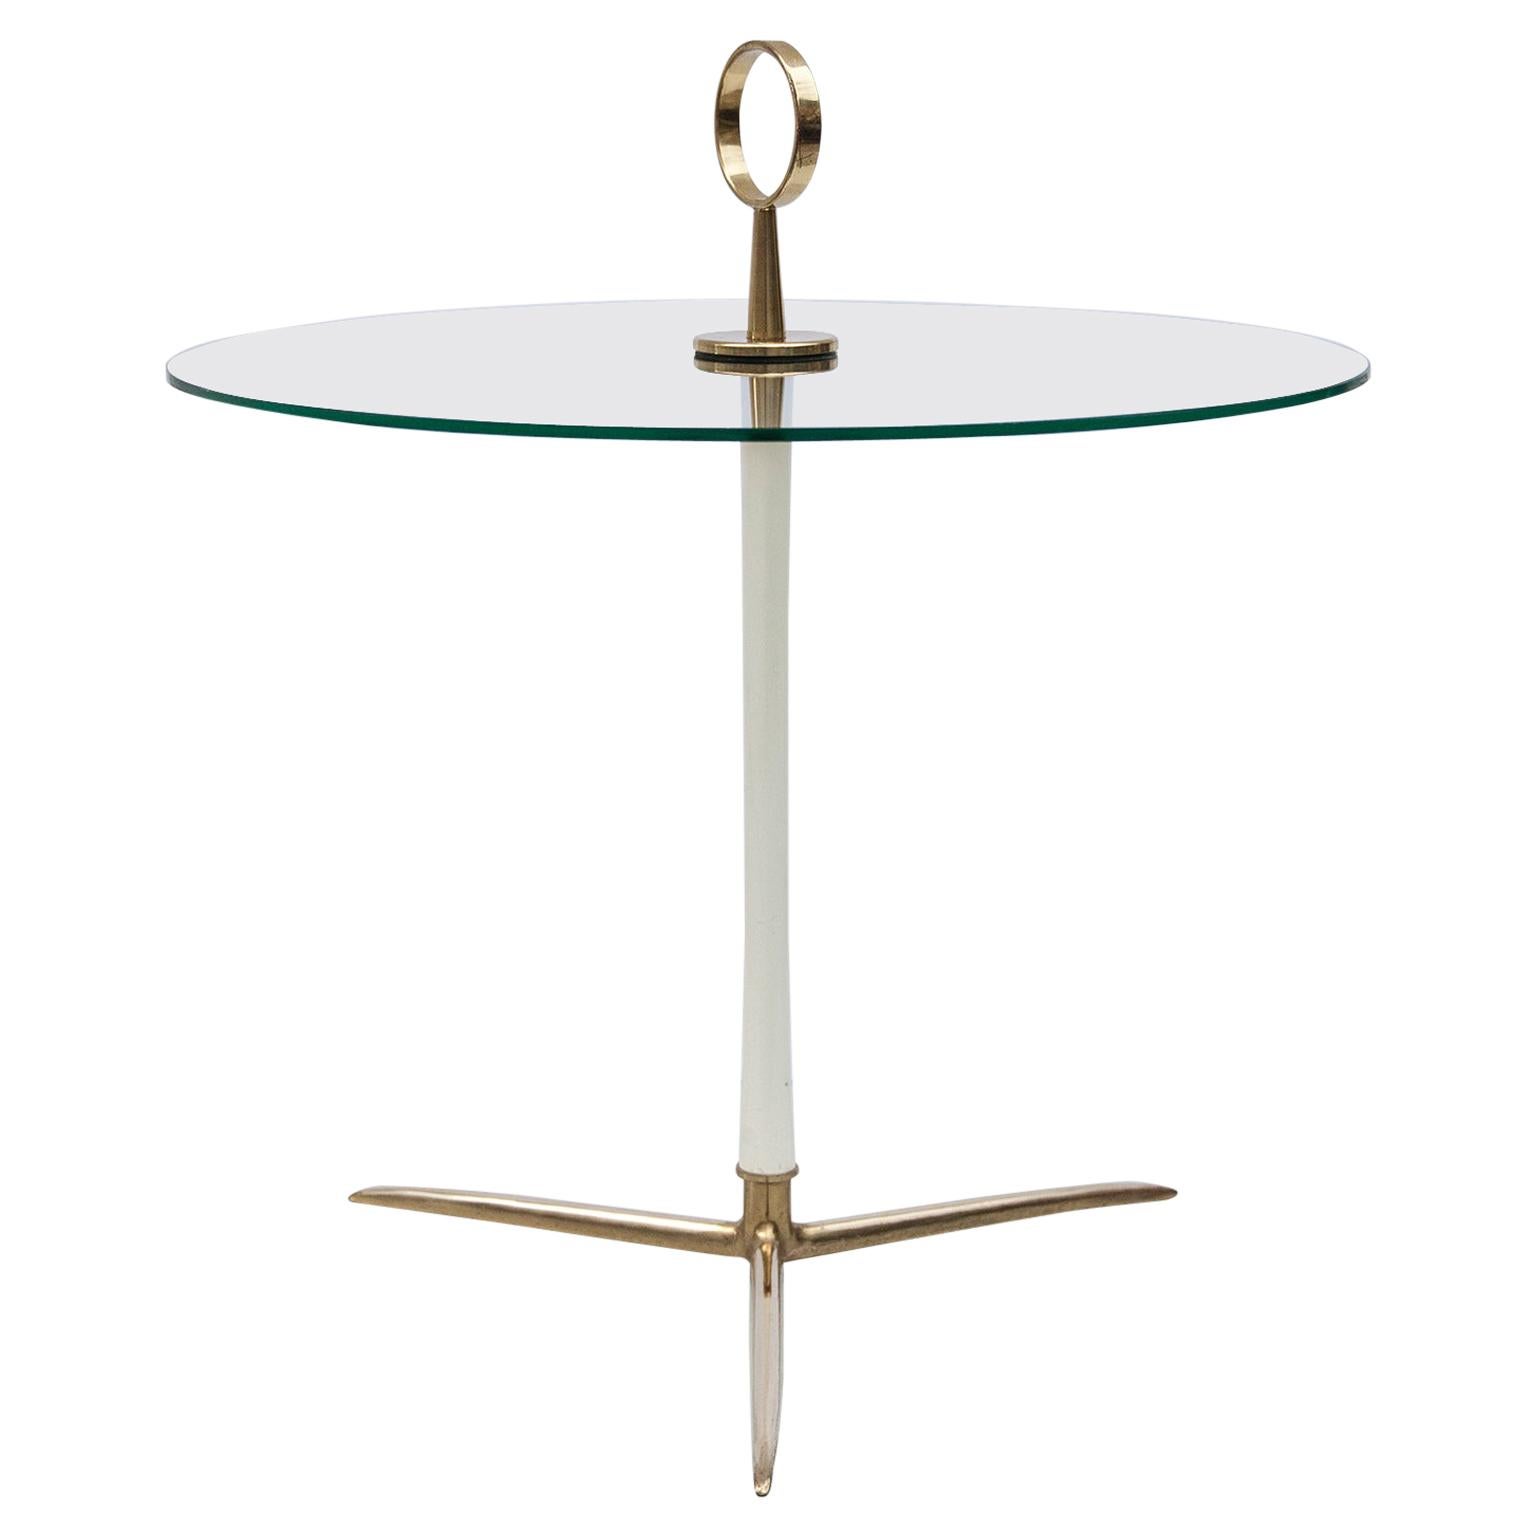 Cesare Lacca Tripod Brass Serving Table, Italy, 1950